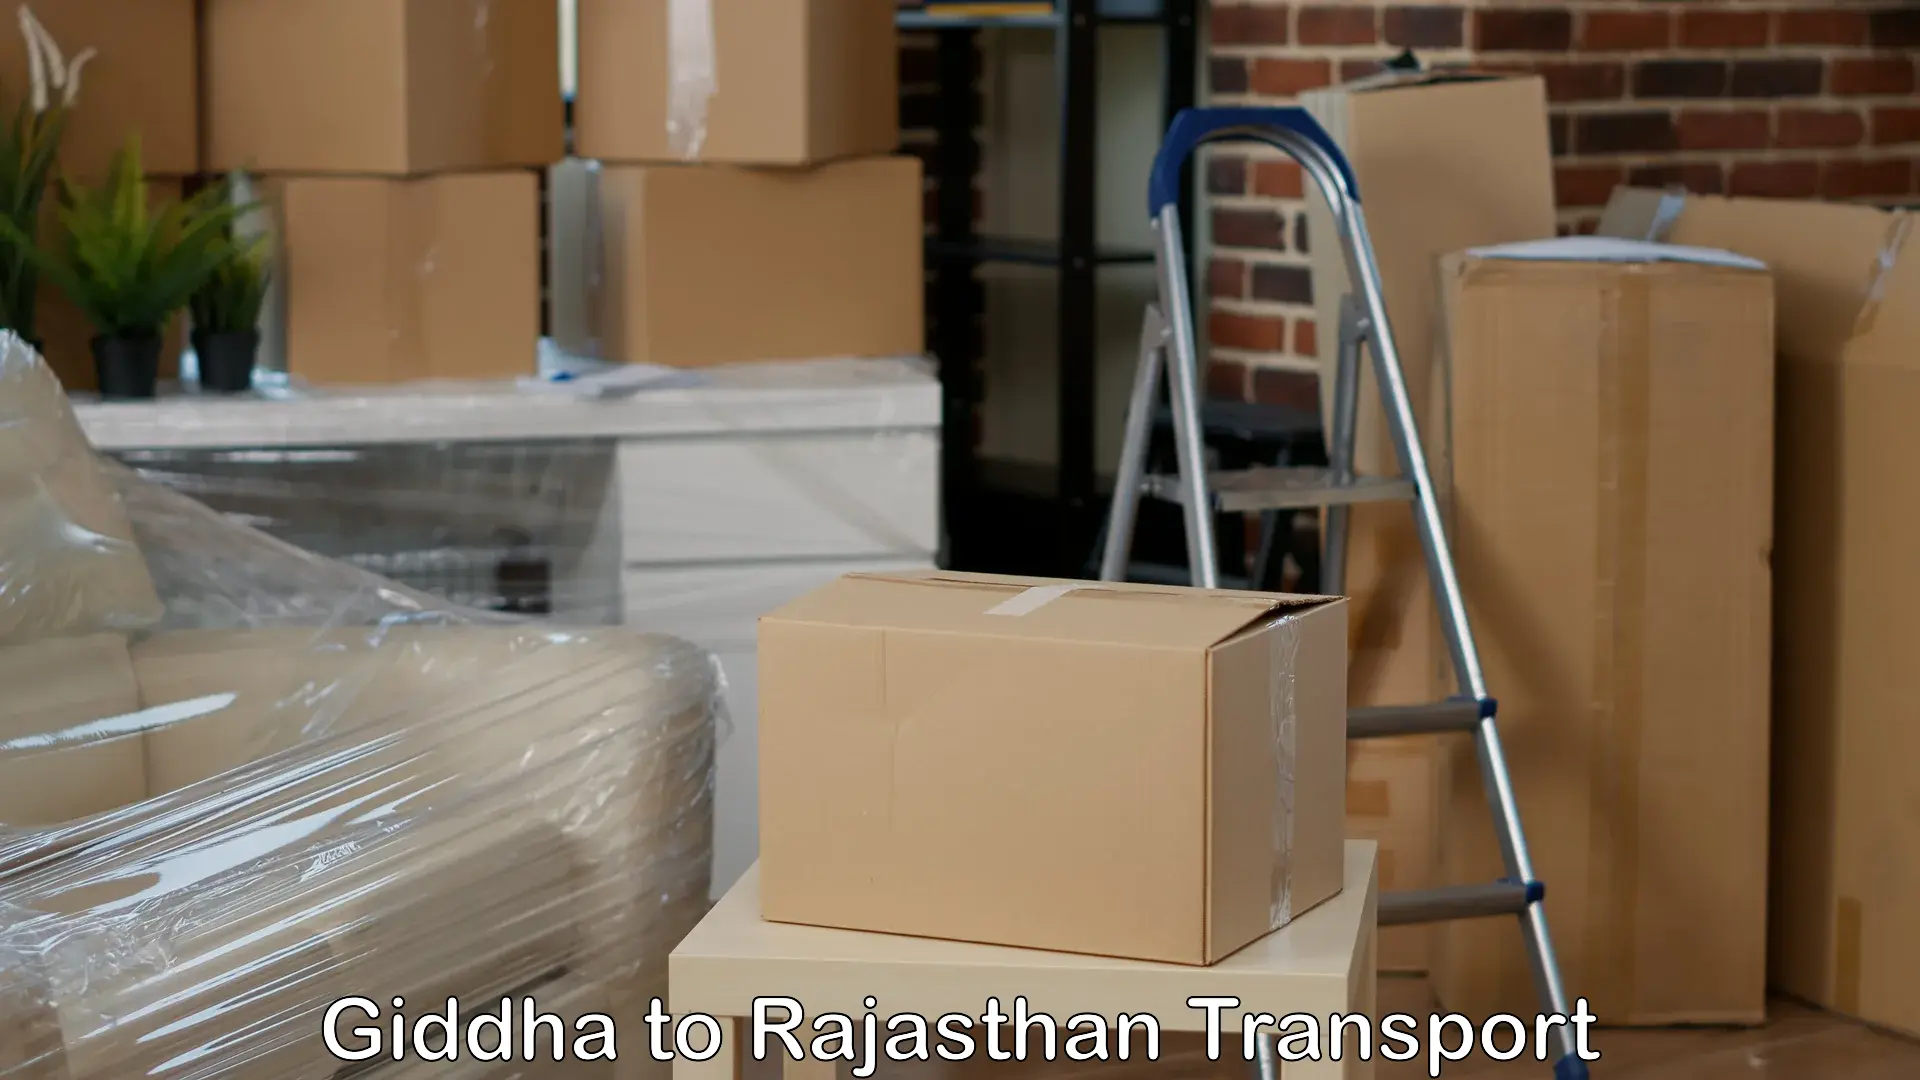 Express transport services Giddha to Piparcity